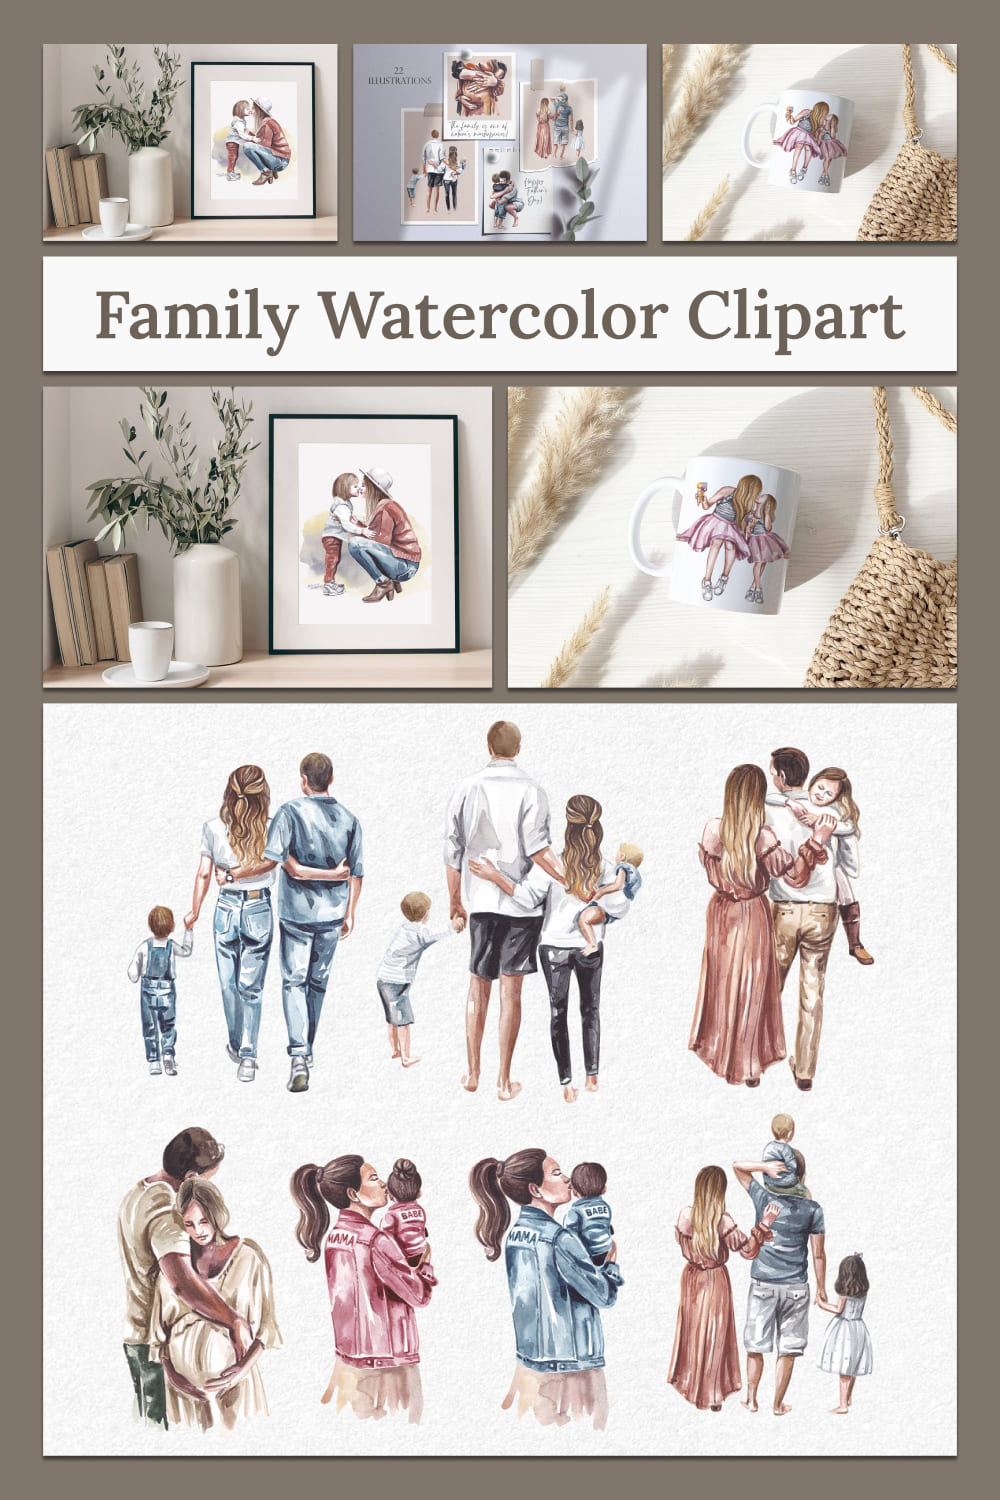 Family watercolor clipart - pinterest image preview.